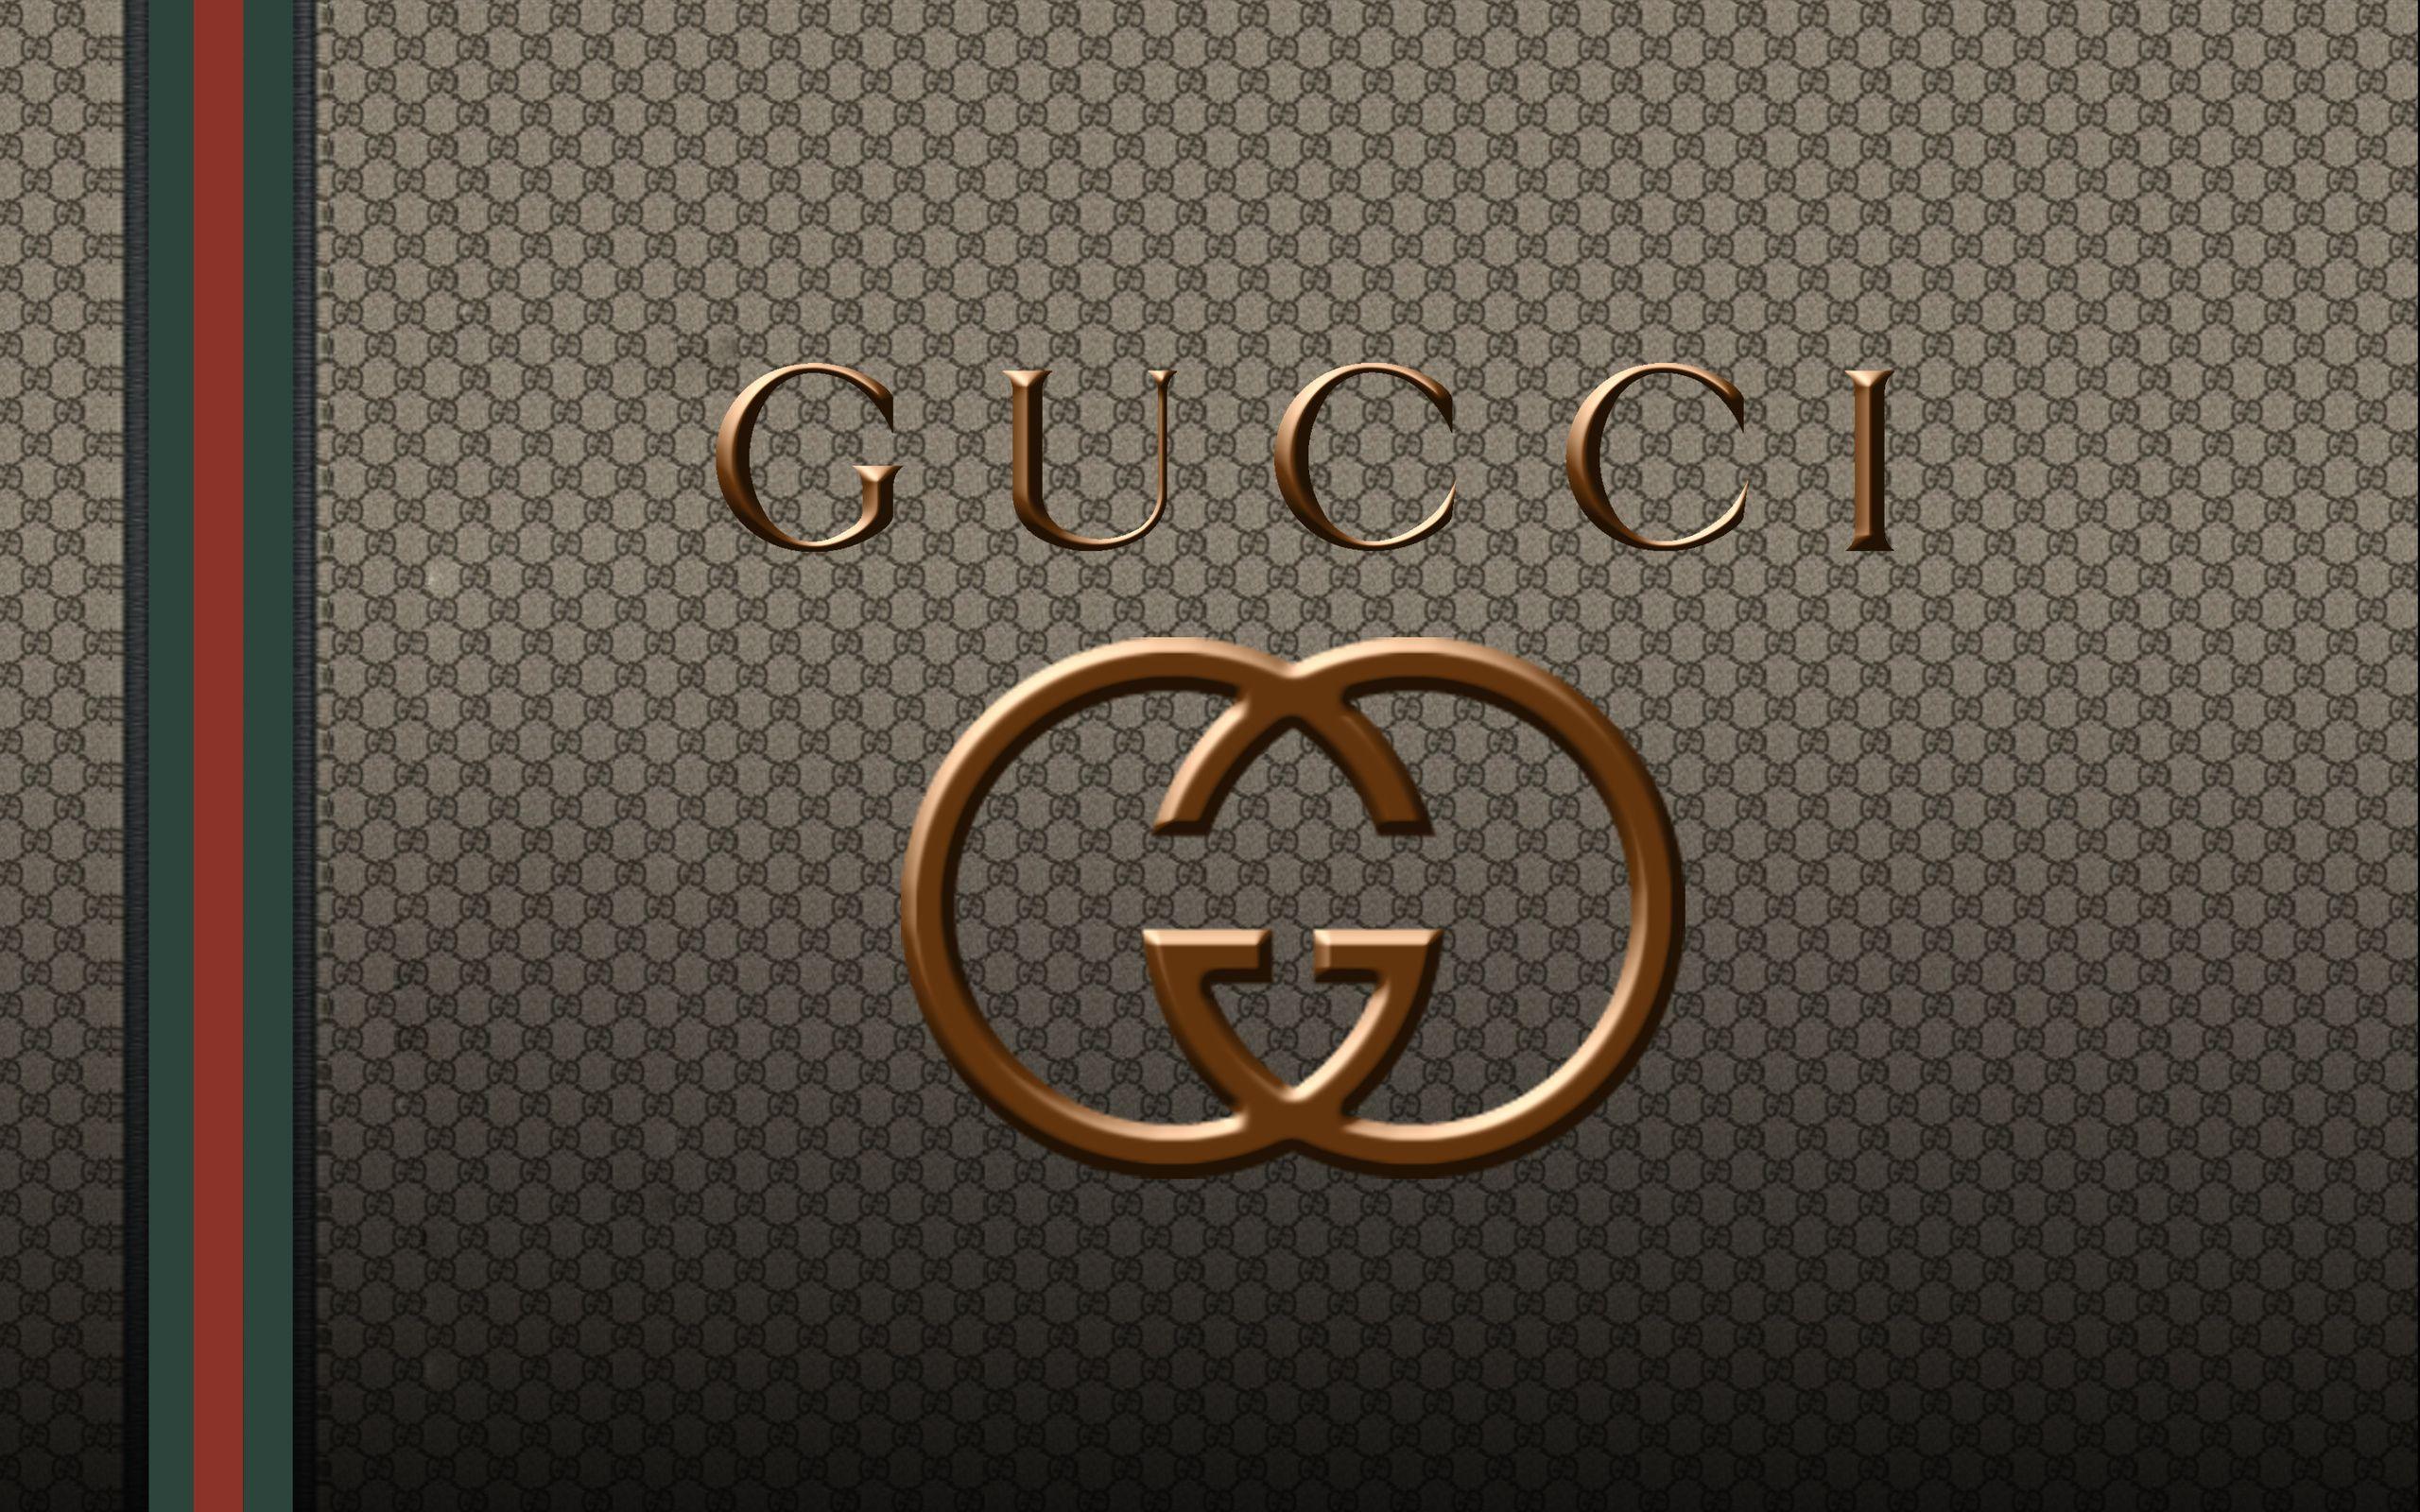 Gucci Wallpapers - Top Free Gucci Backgrounds - WallpaperAccess